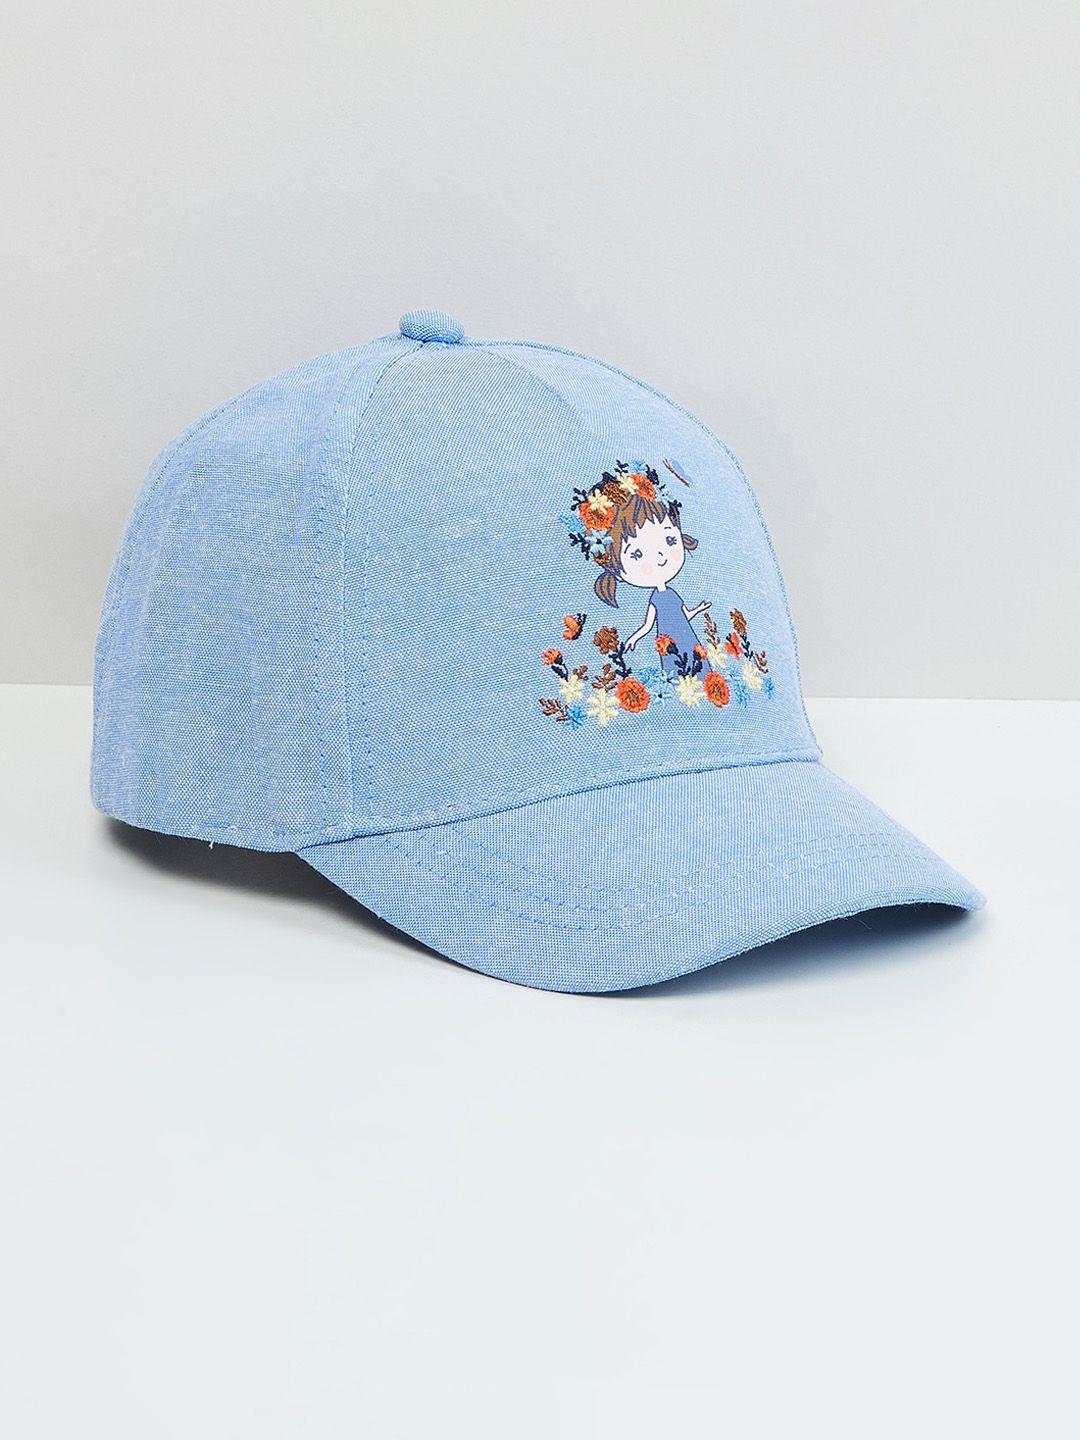 max-girls-embroidered-cap